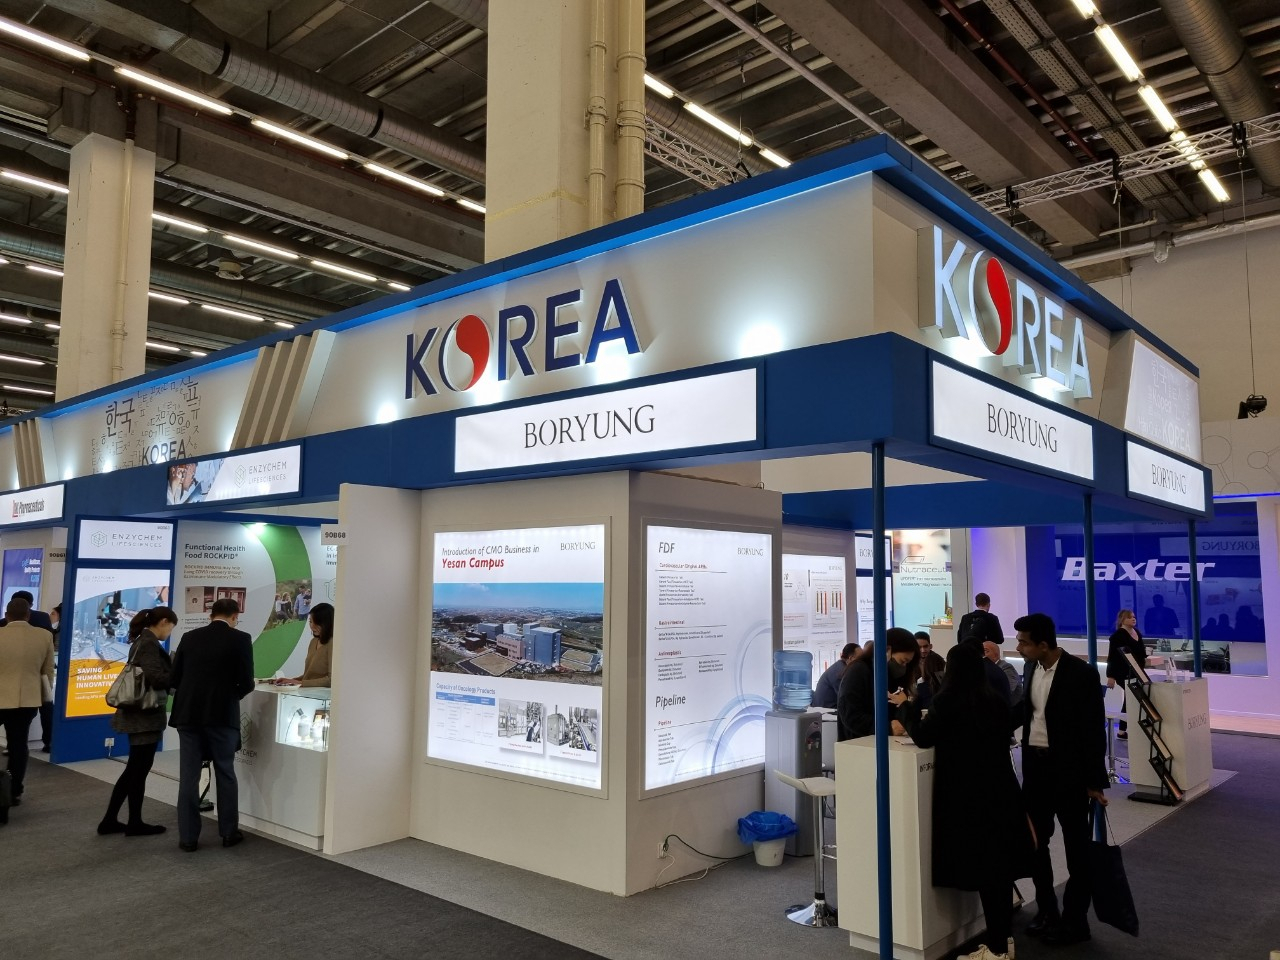 Attendees engage with South Korea’s pavilion at the 2022 Convention on Pharmaceutical Ingredients Worldwide held in Frankfurt, Germany. (Kan Hyeong-woo/The Korea Herald)